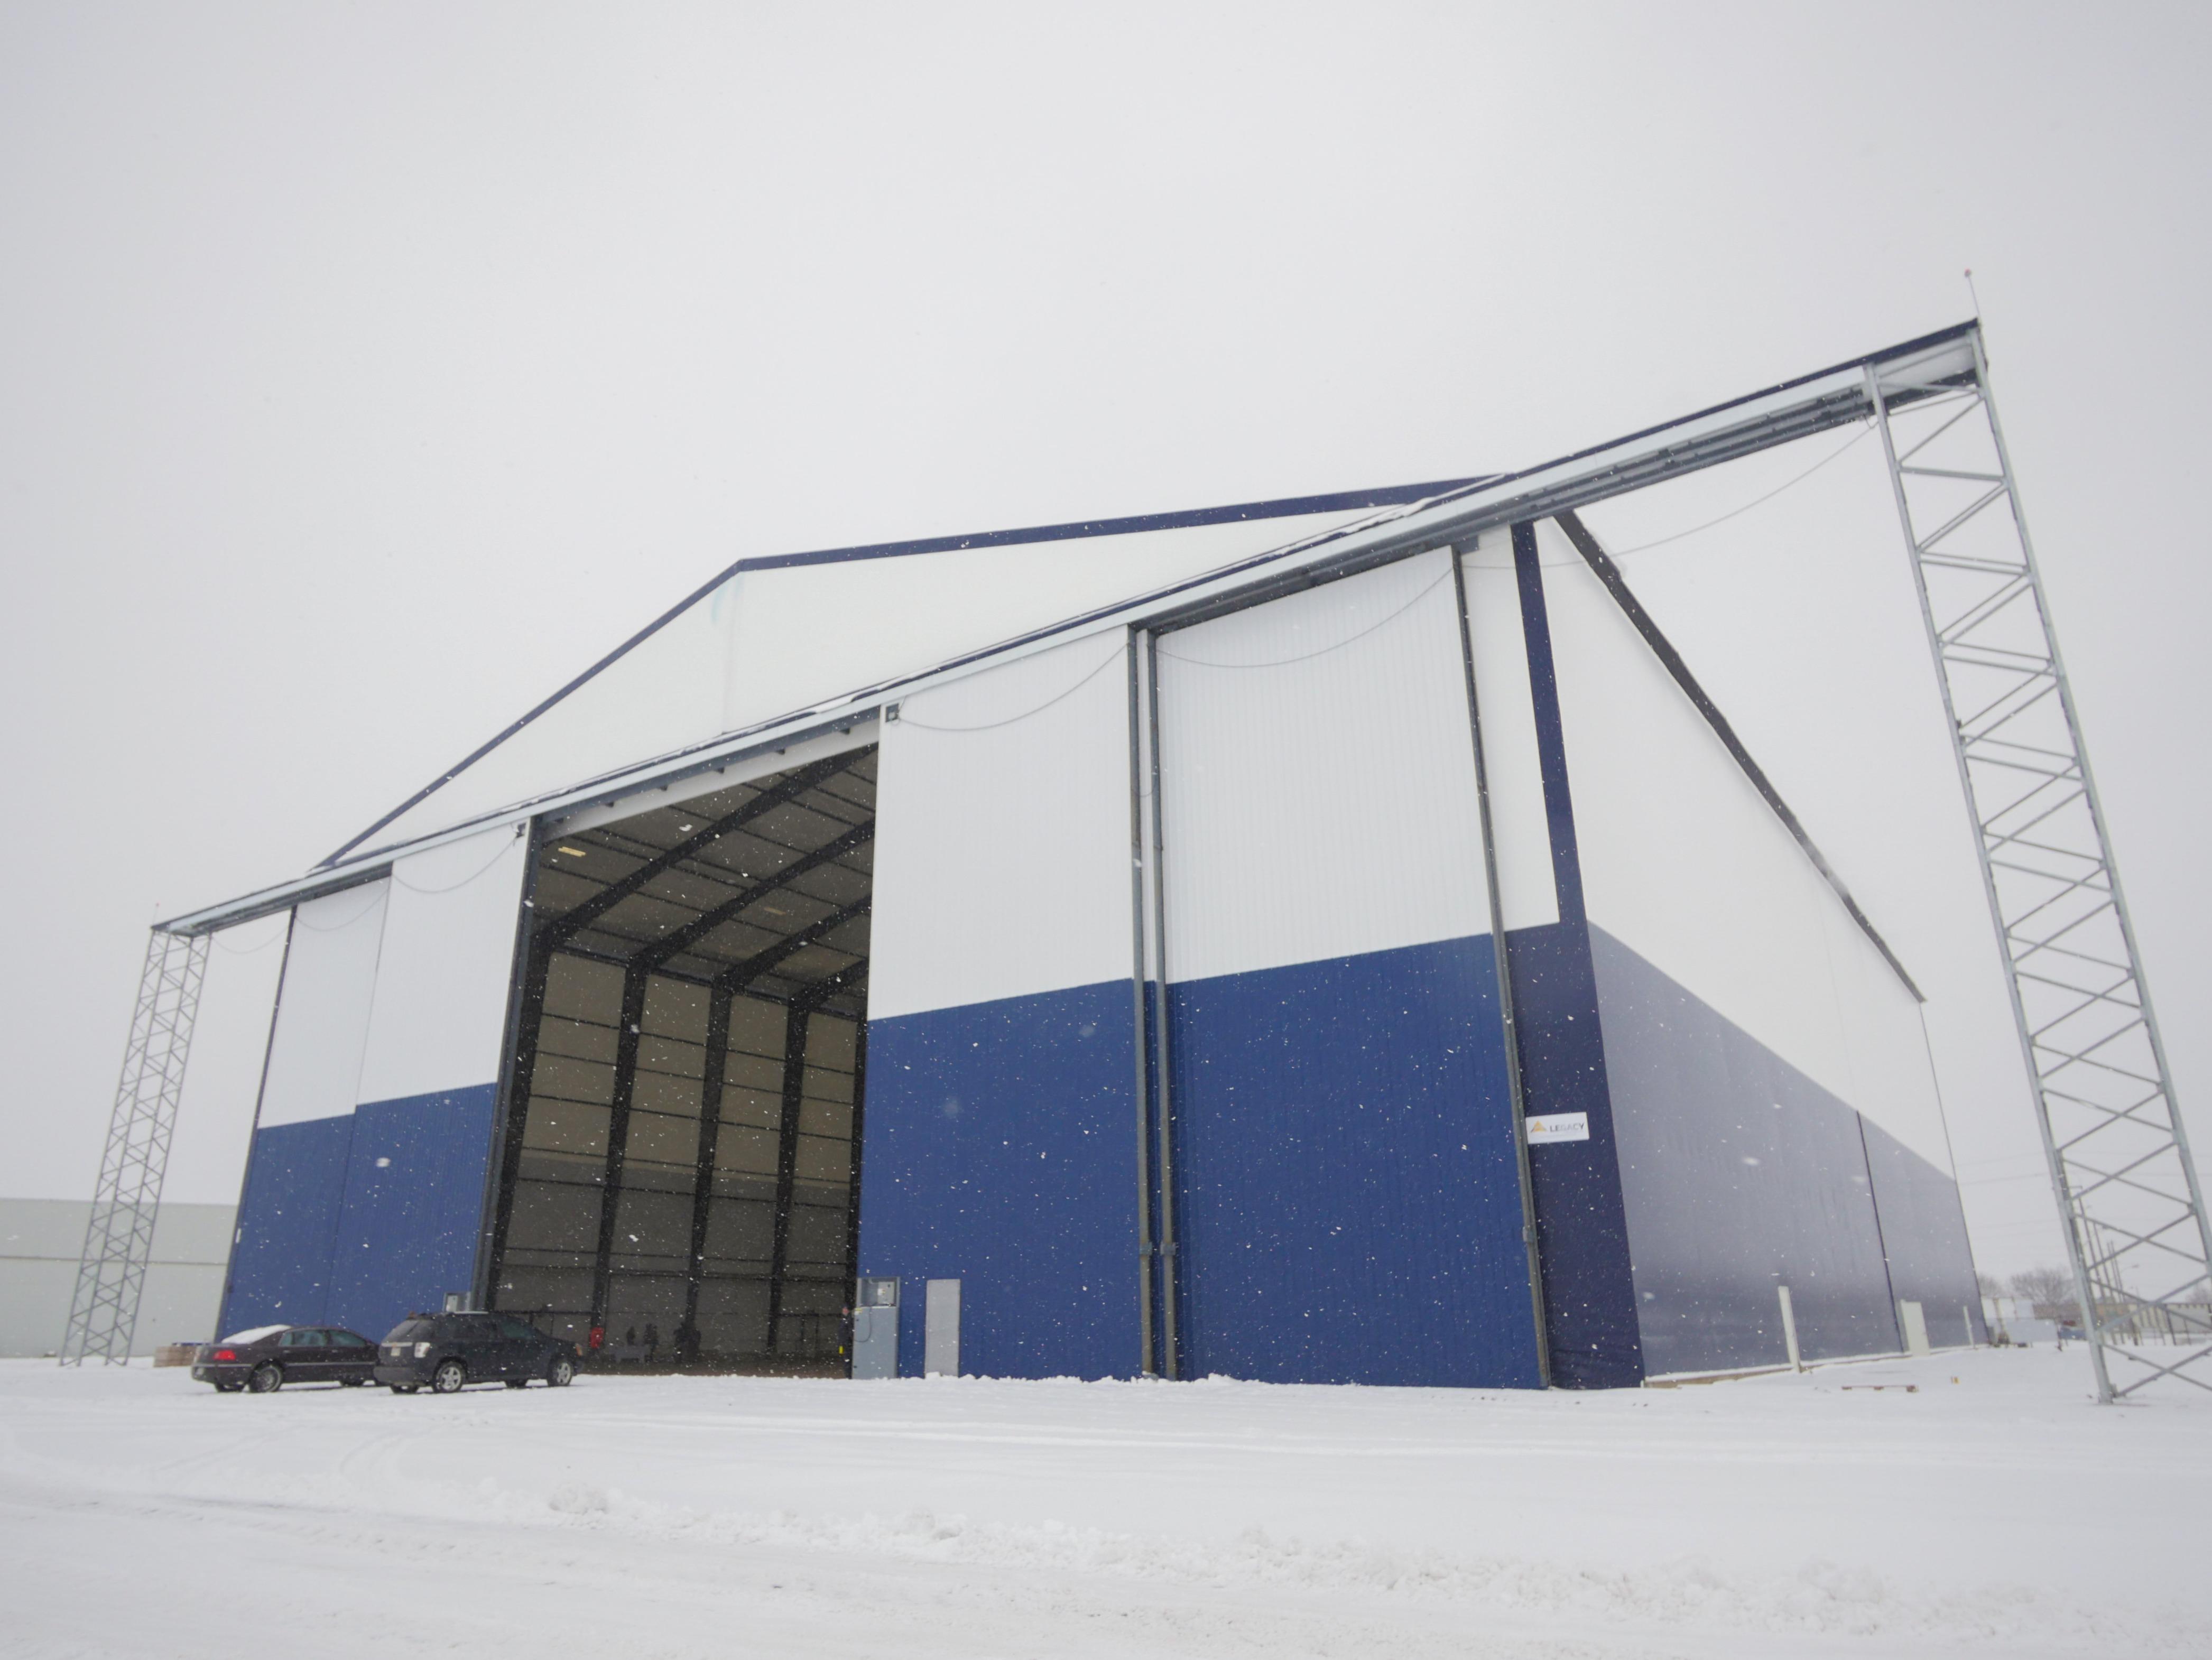 aircraft assembly hangar, off-grid building, fabric structure